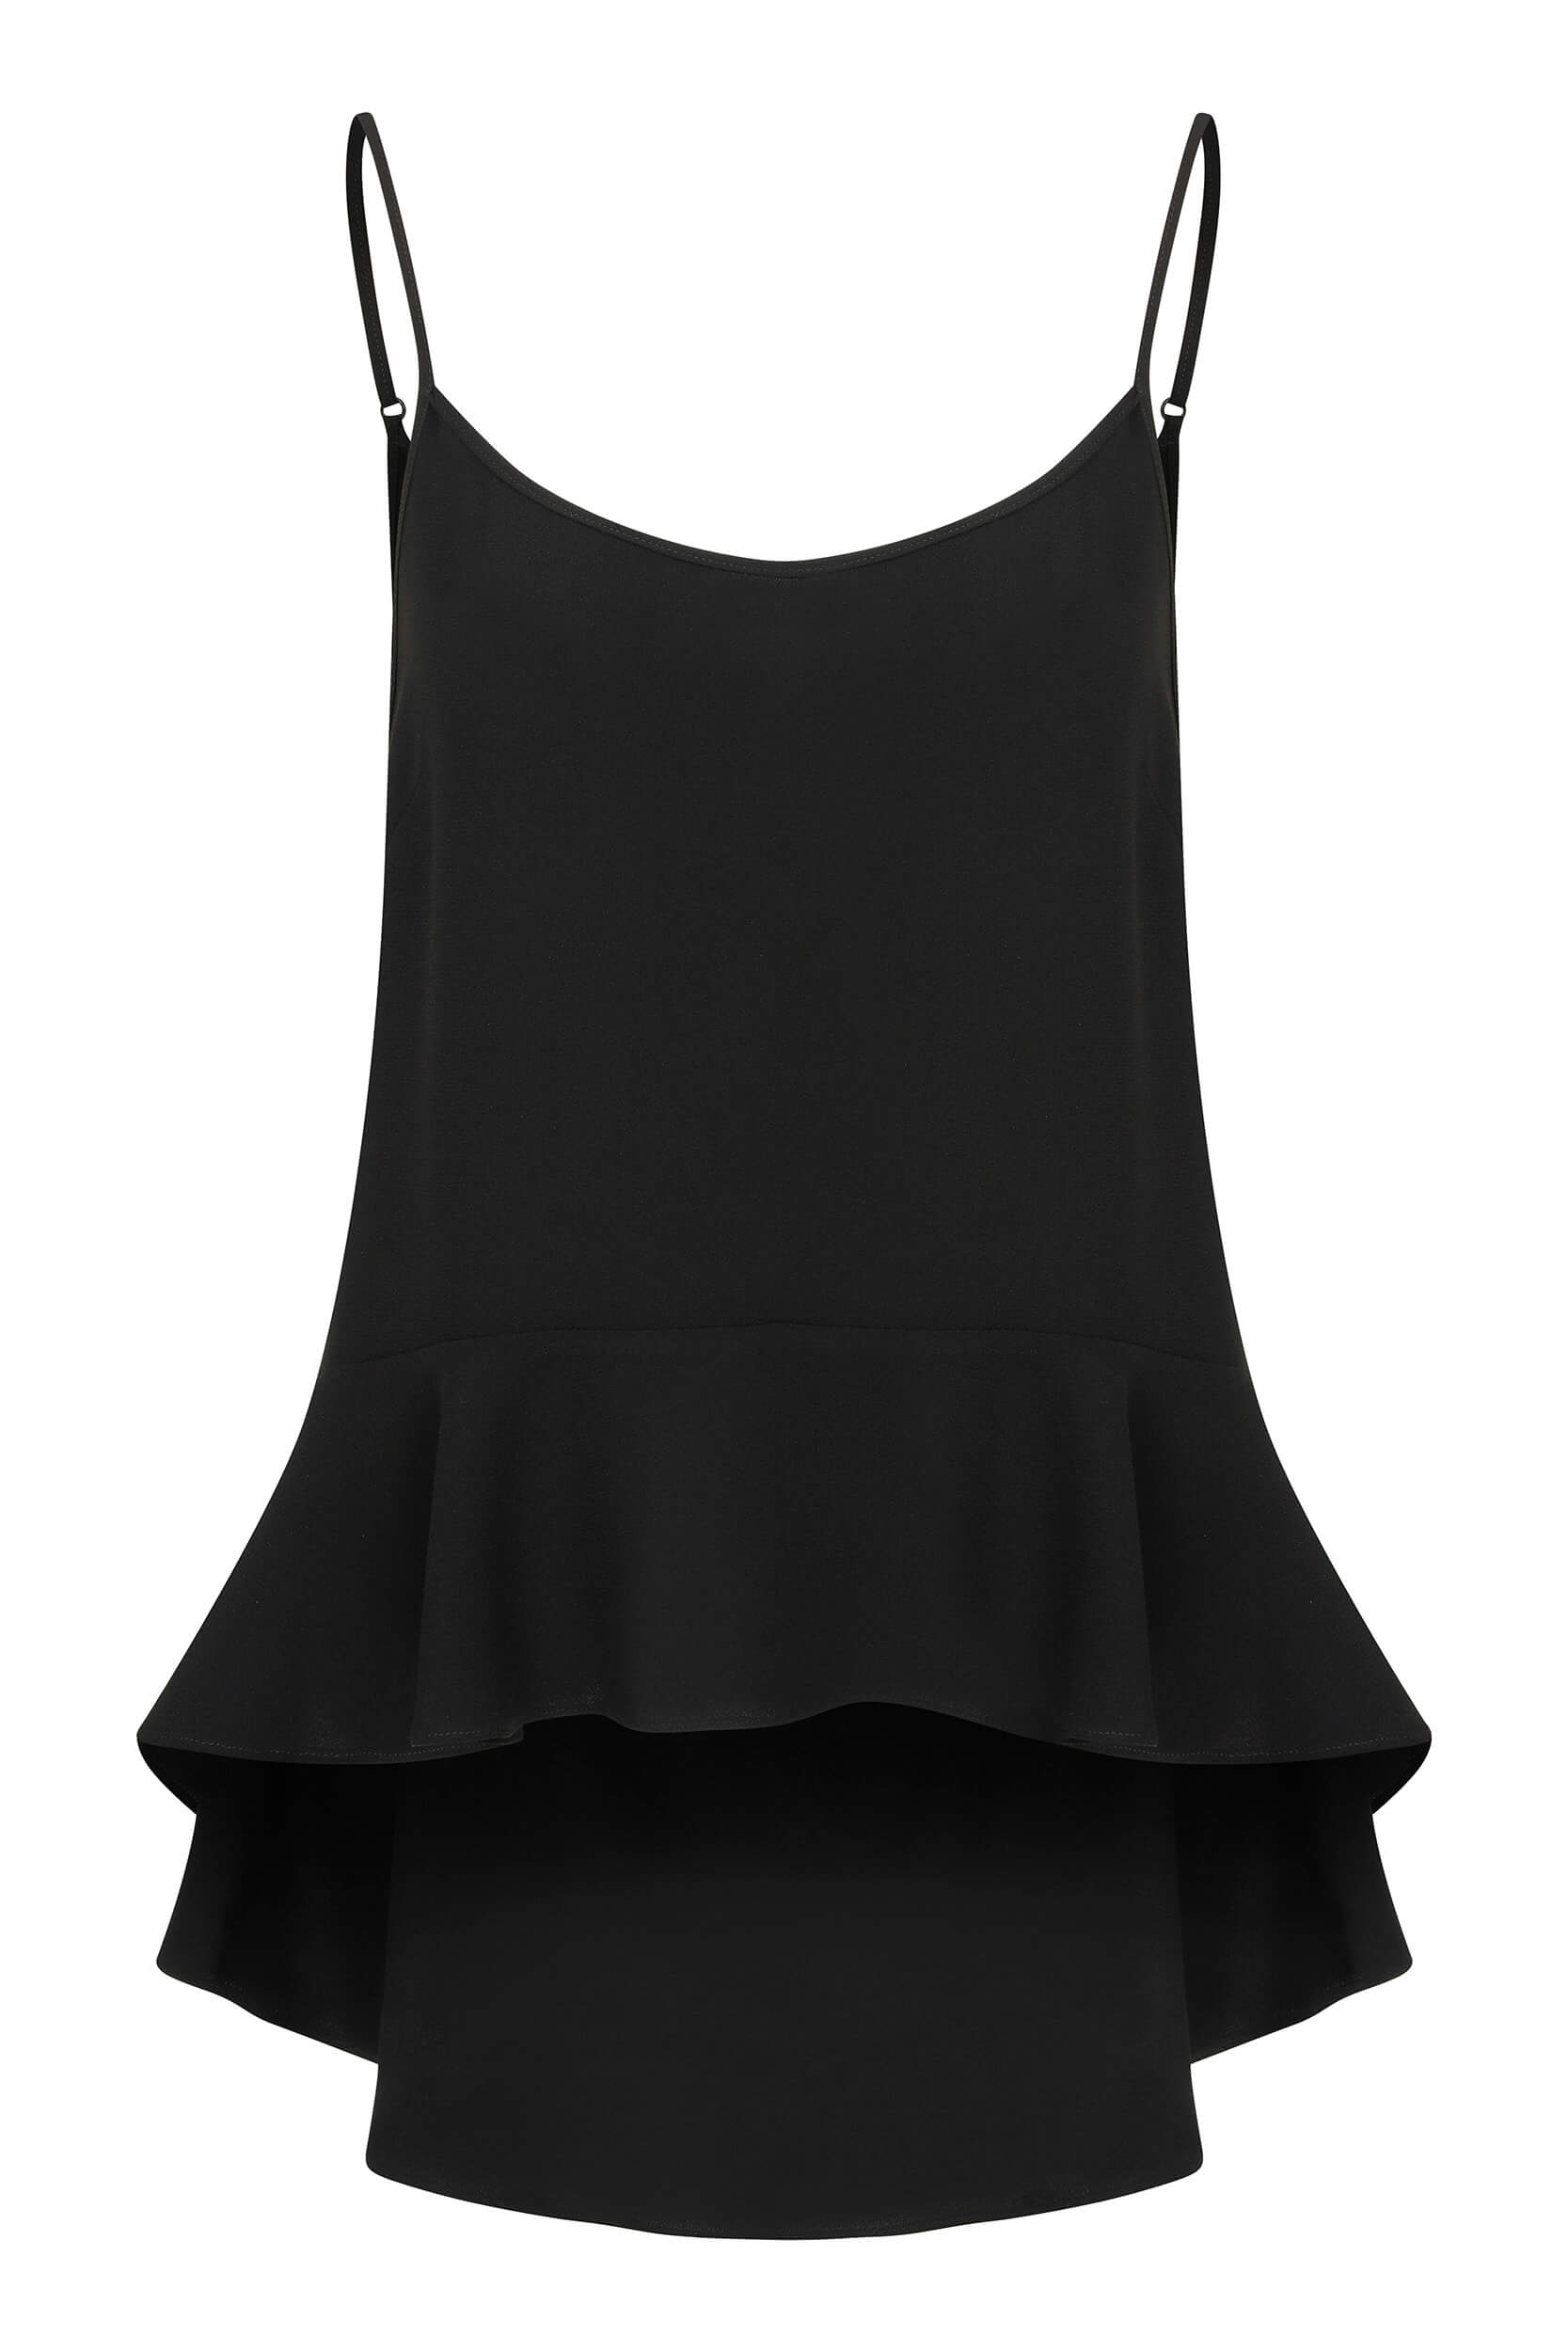 Roman Solid Camisole in black (HOT!). 2